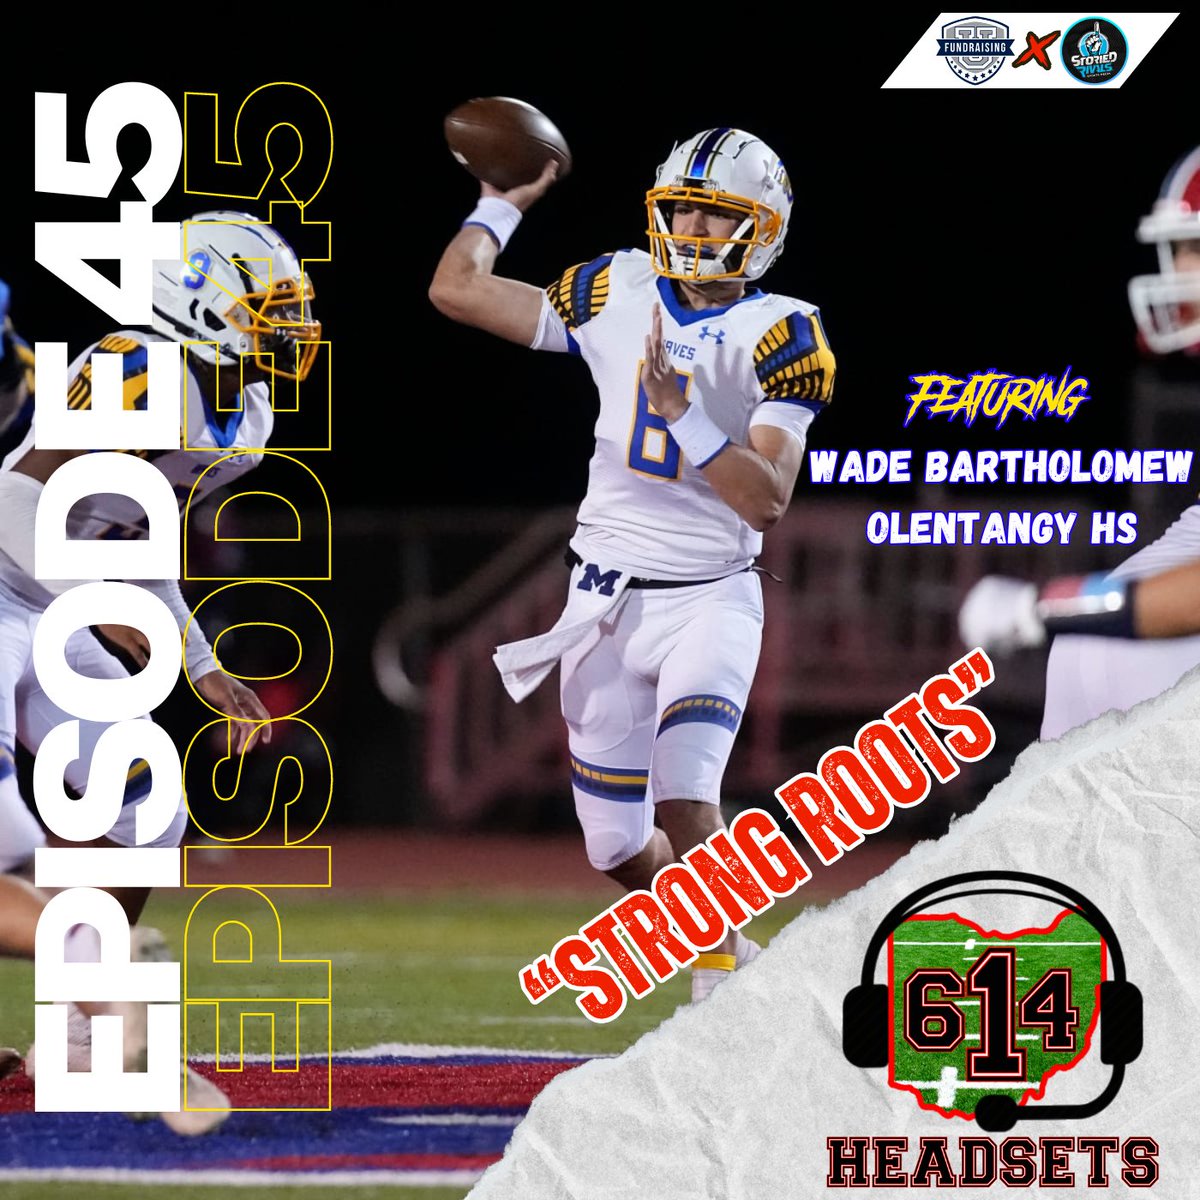 This week on E. 45 'Strong Roots' presented by @OhioFundraising & @StoriedRivals. @OHSBravesFB Head Coach @CoachBart11 joins the show to talk player development & developing a player centered program. 💻 614headsets.com Apple: